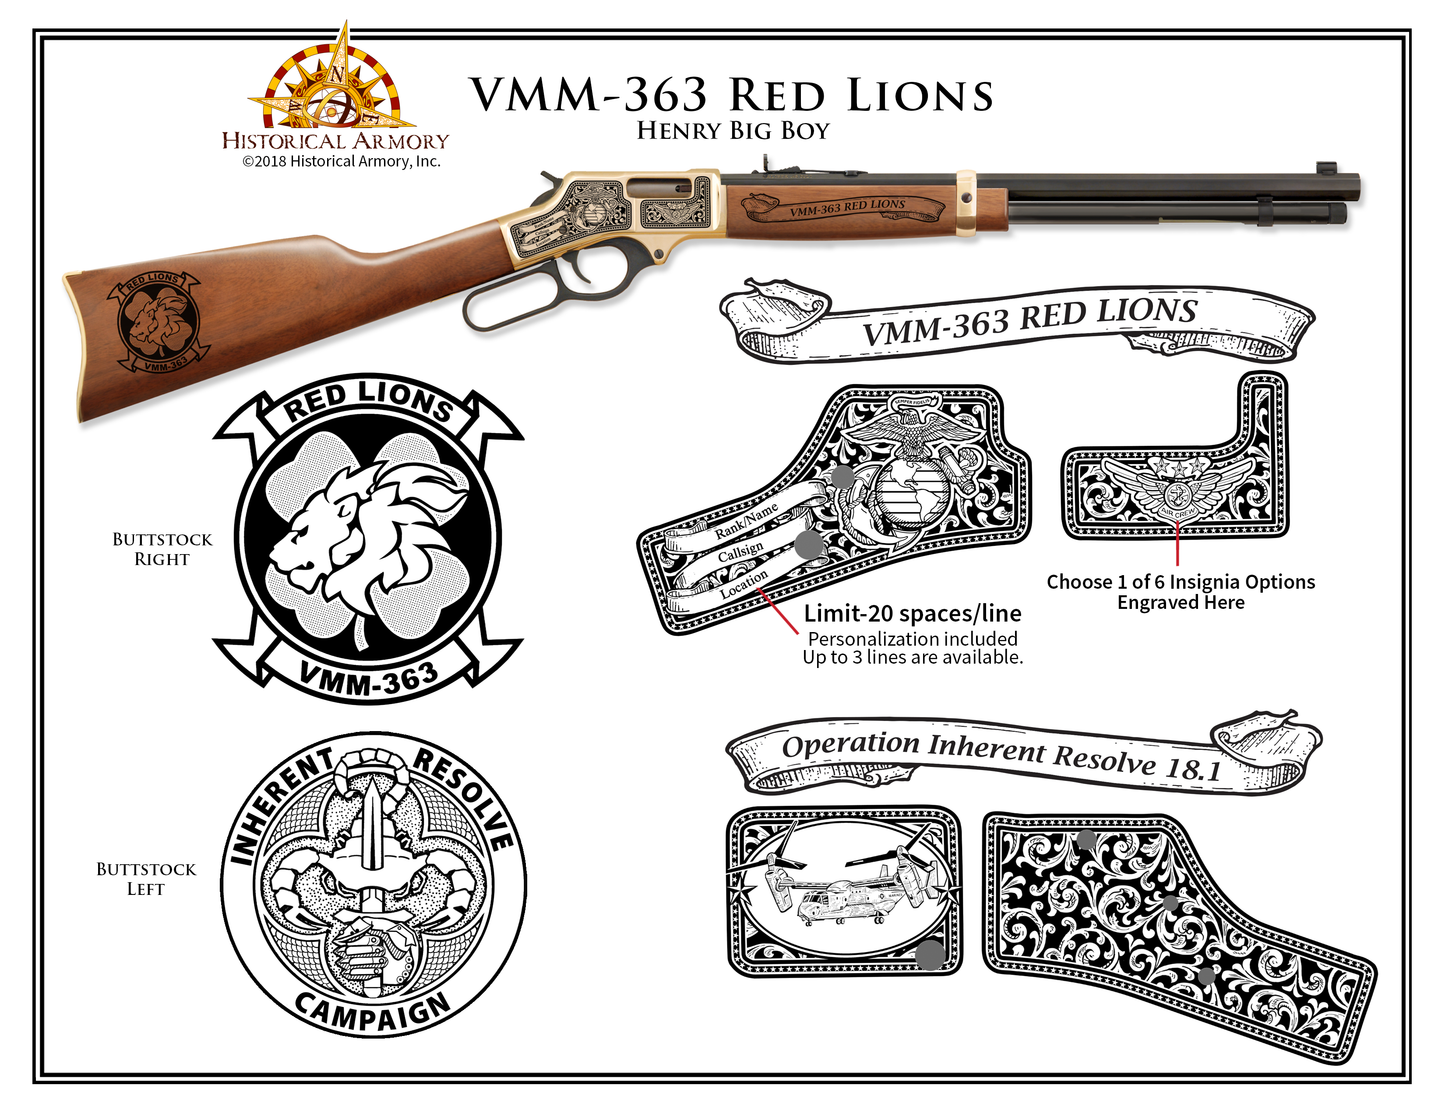 VMM-363 Red Lions Edition